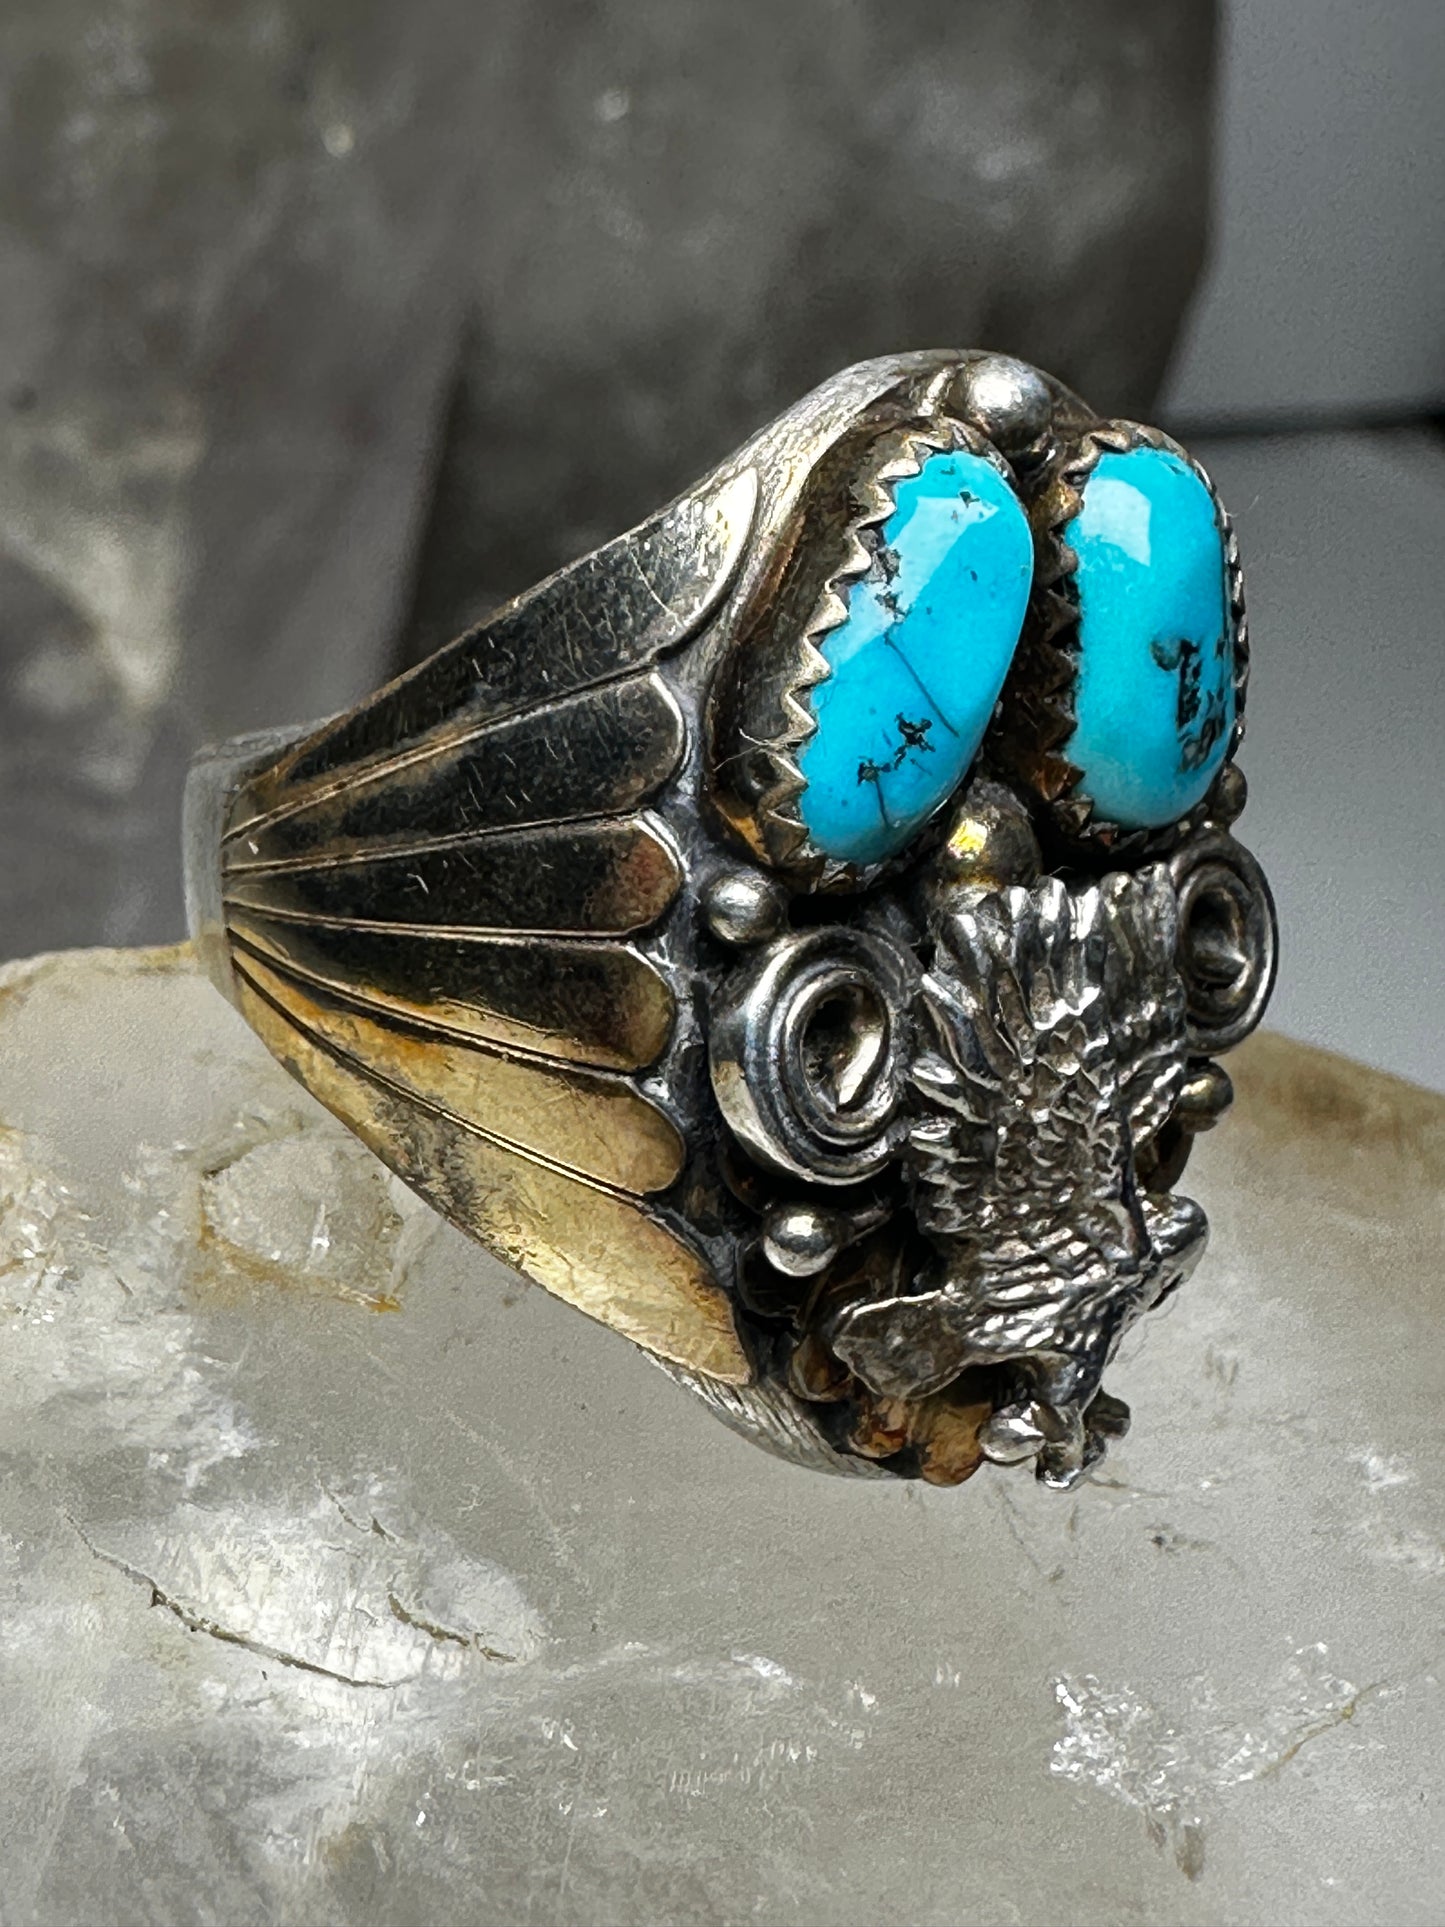 Eagle ring size 12 Navajo signed AL turquoise  sterling silver women men